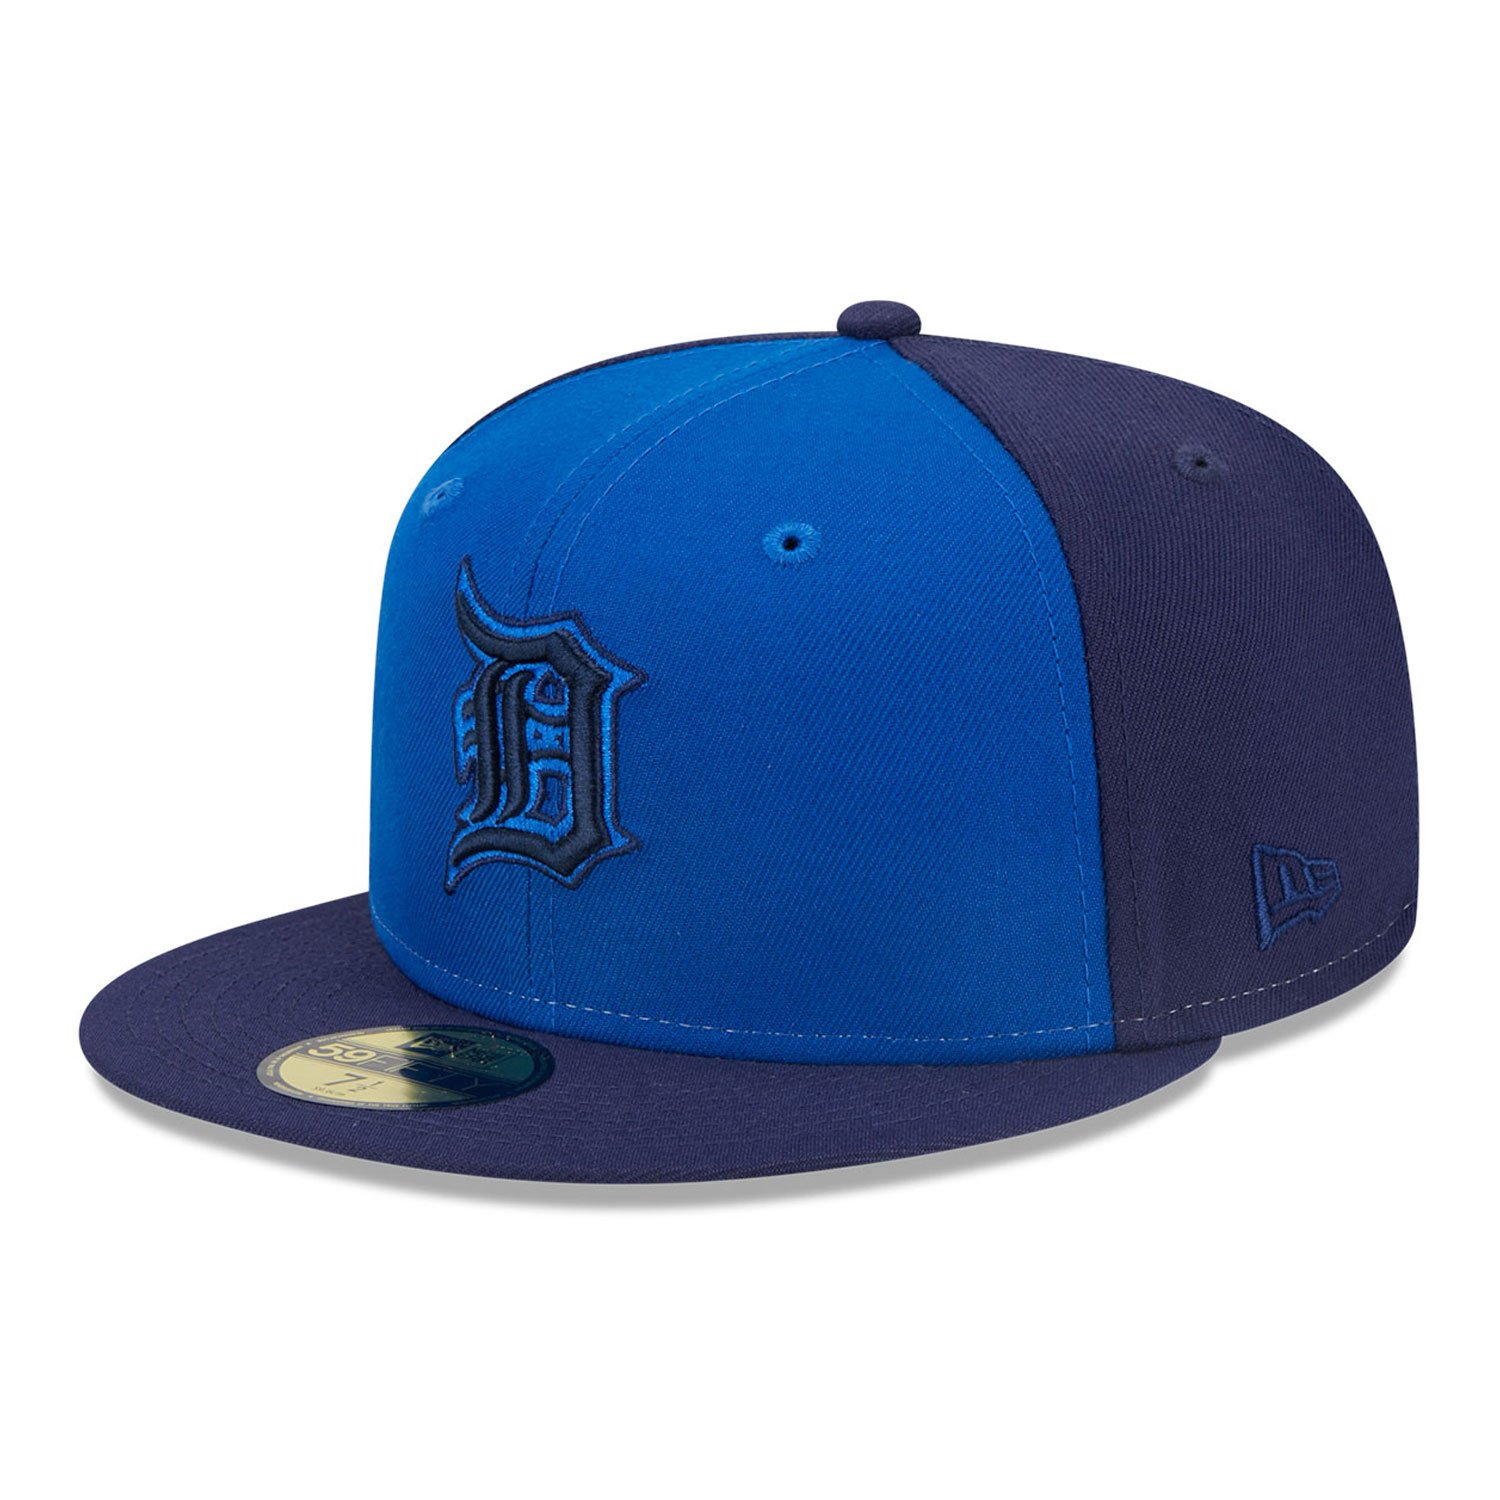 Detroit Tigers Tri Tone Team Blue 59FIFTY Fitted Cap